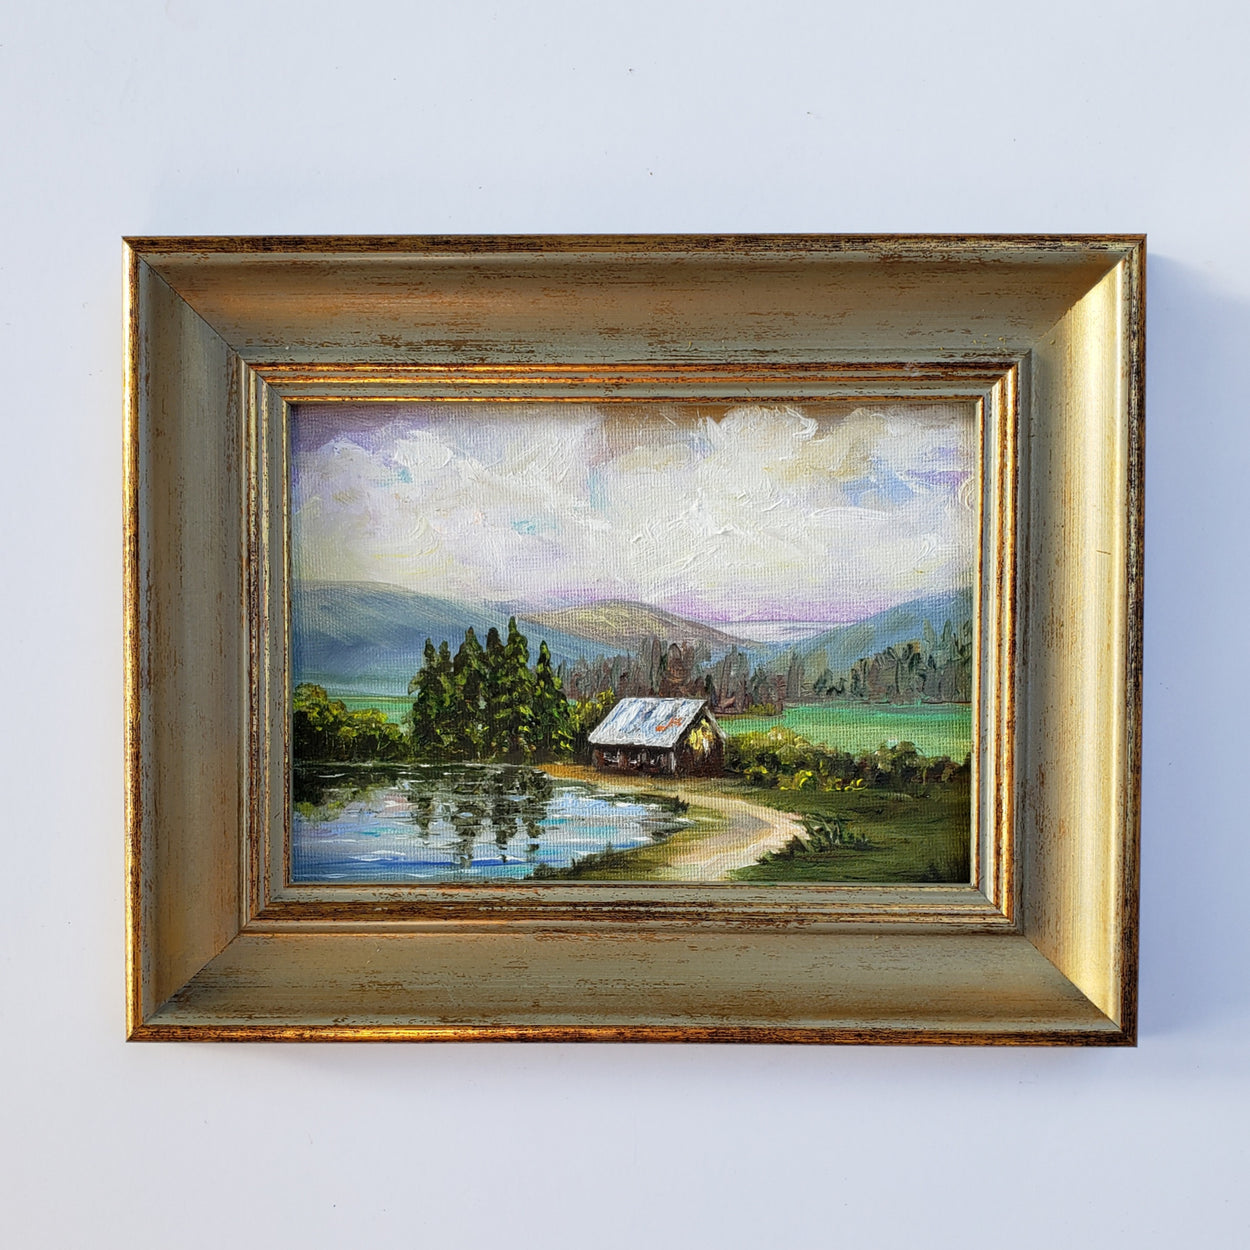 Original oil painting of the pond by the barn... puffy clouds and mountains in a peaceful setting.